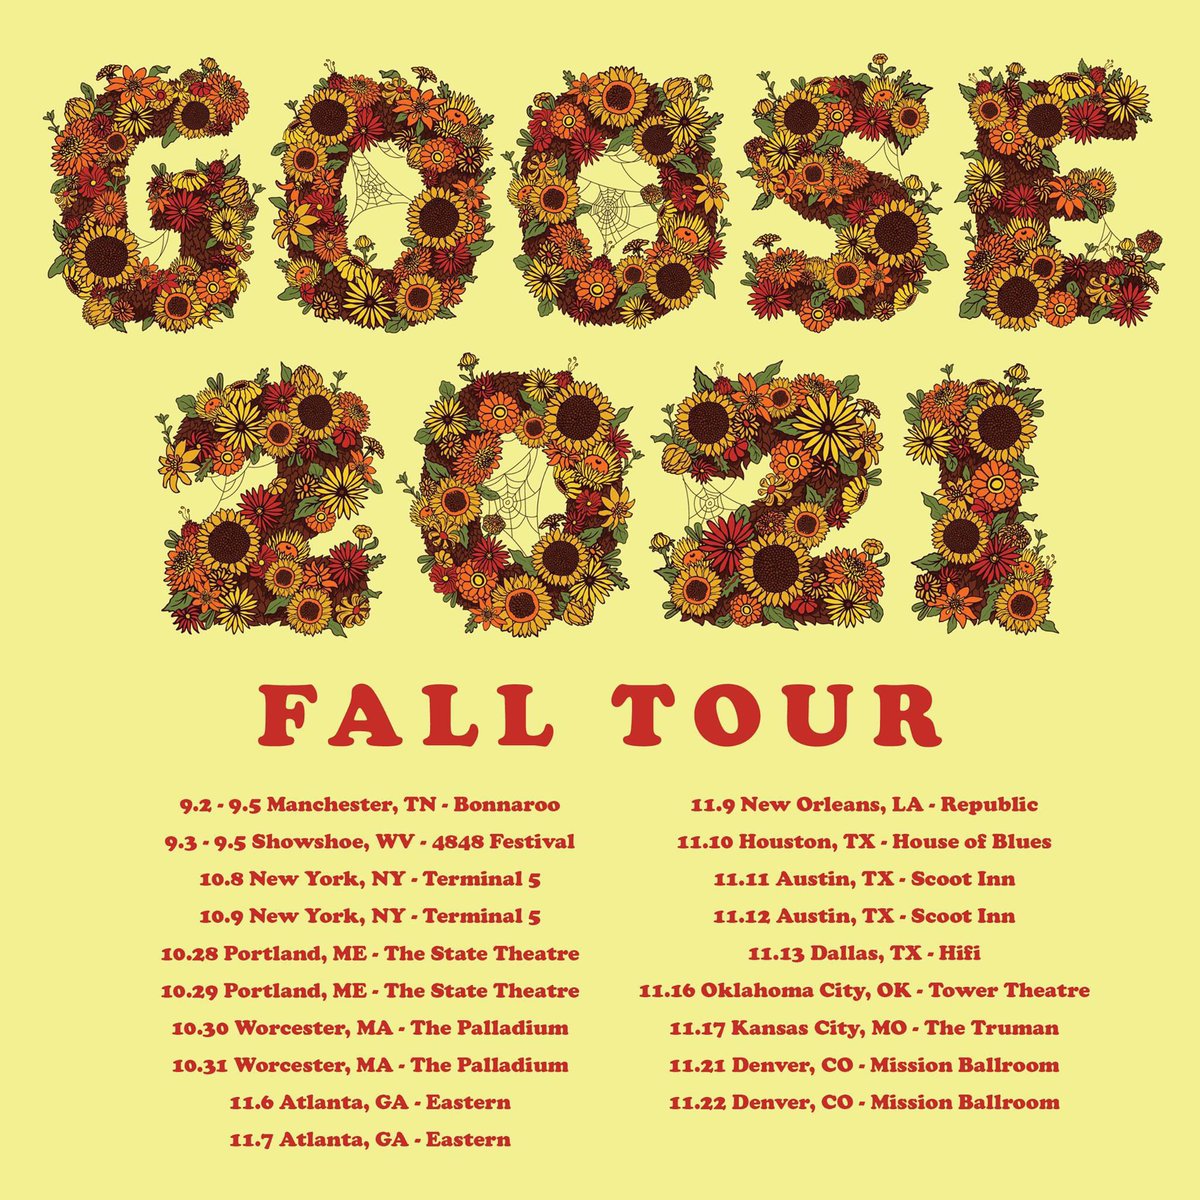 3 years ago today @goosetheband announced their Fall 2021 Tour.  Which shows did you see?